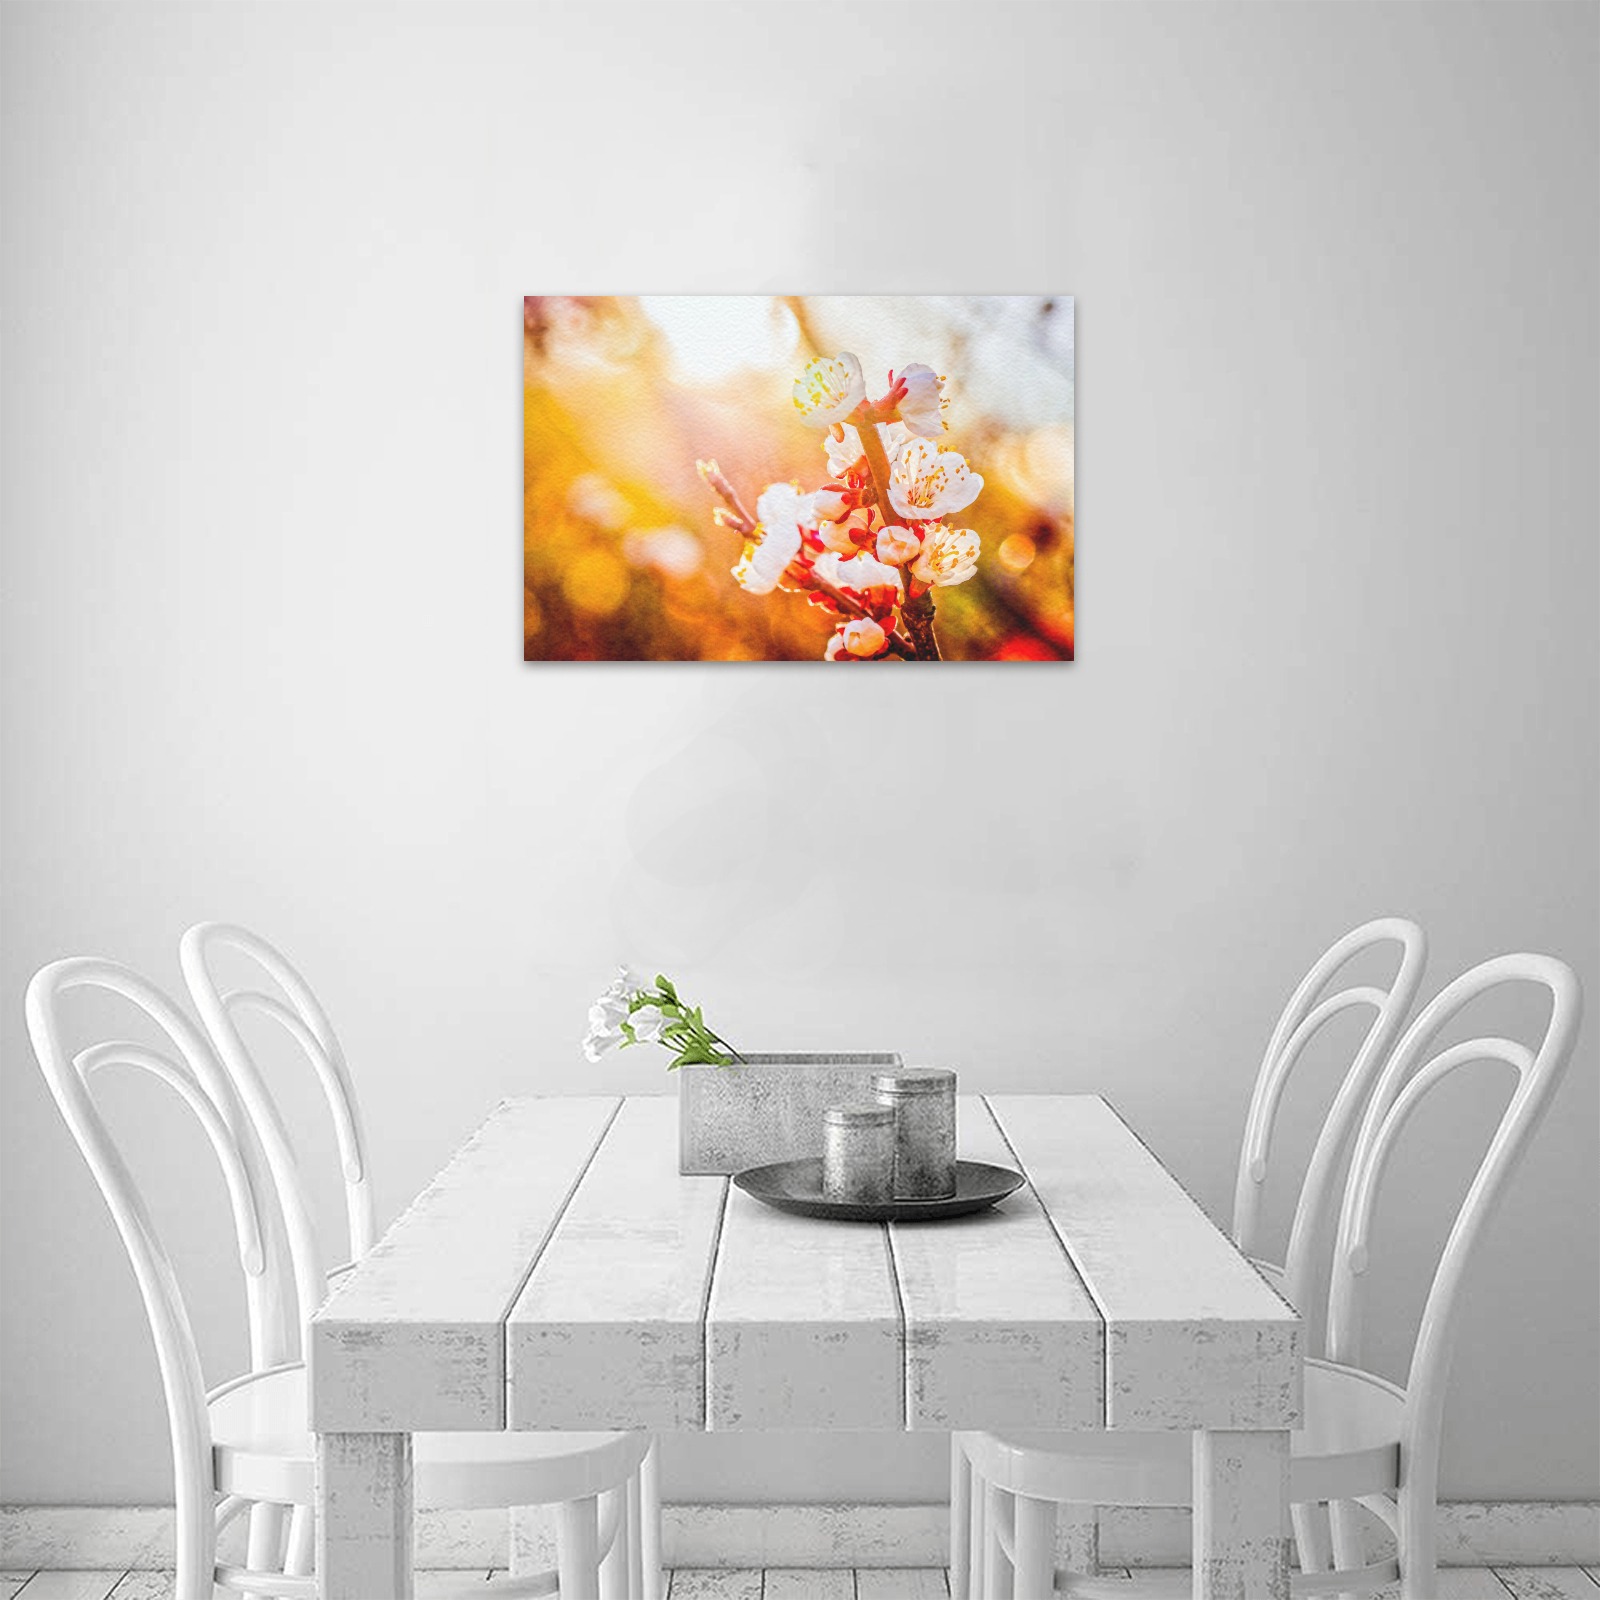 Japanese apricot flowers in the light of sunset. Upgraded Canvas Print 18"x12"